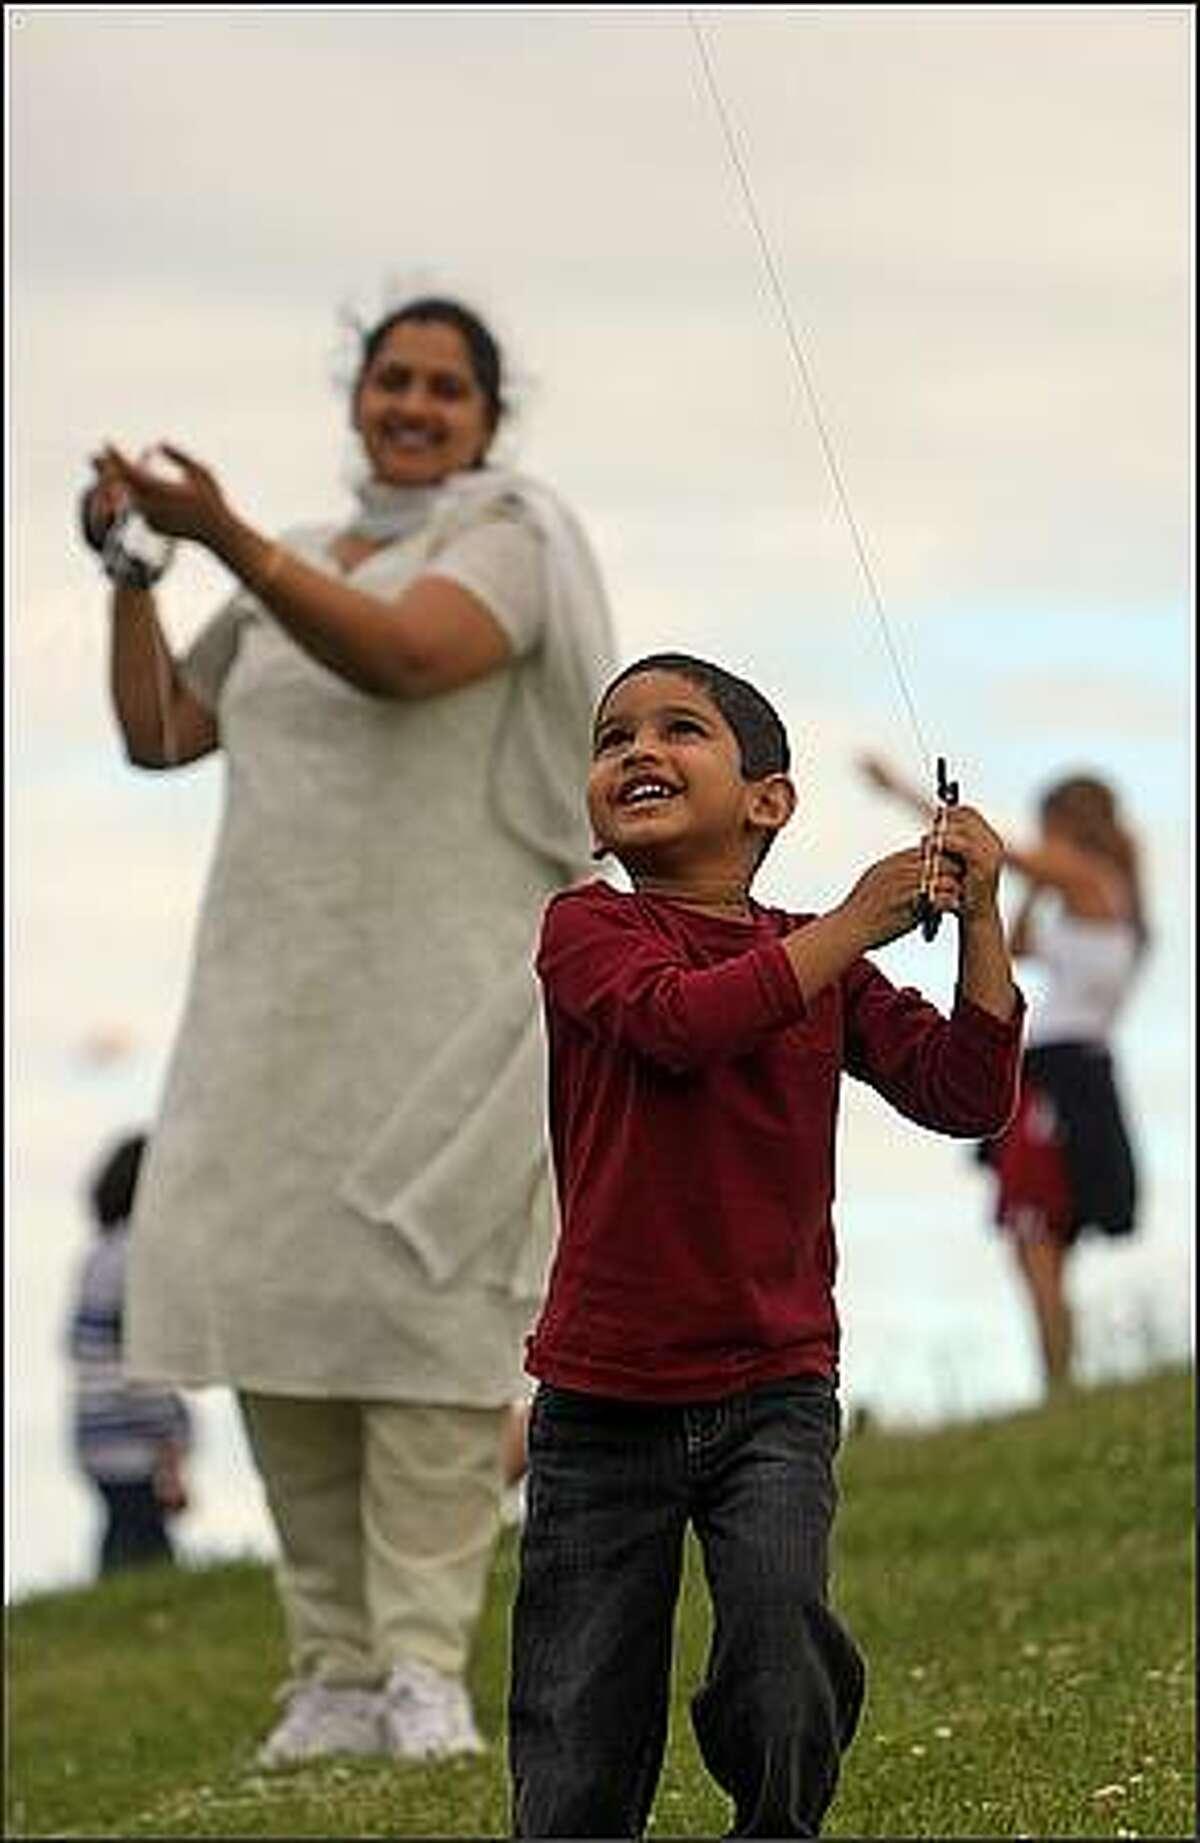 Sanjay Javvadi, 3, of Mercer Island, flies a kite before the fireworks show at Gas Works Park in Seattle on the Fourth of July. He was there with his parents.